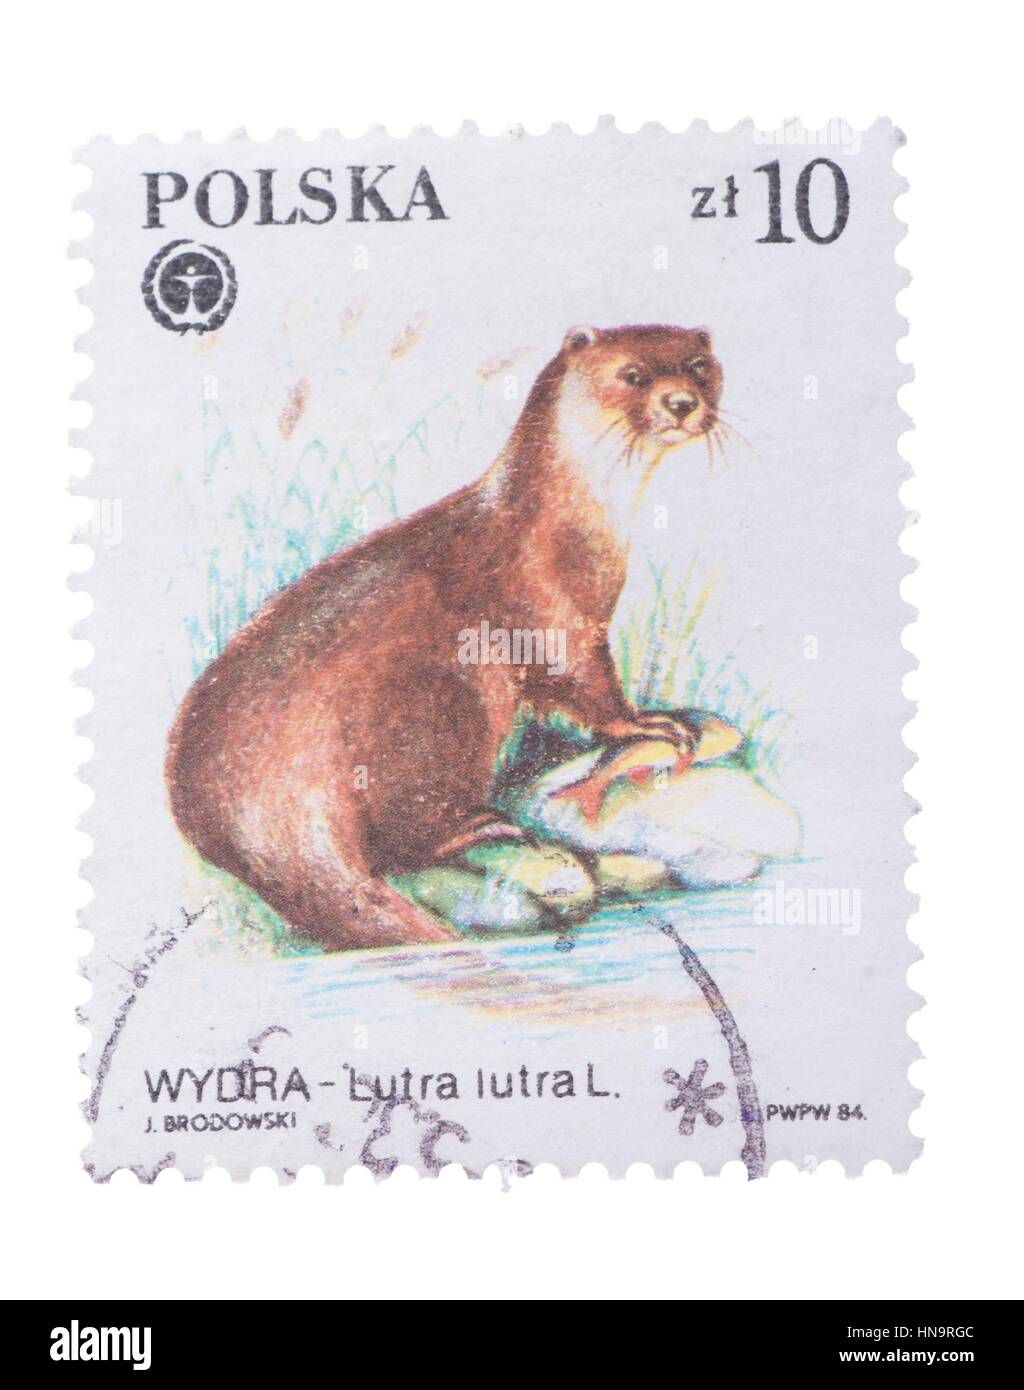 POLAND - CIRCA 1984: A Stamp printed in  shows image of Stock Photo